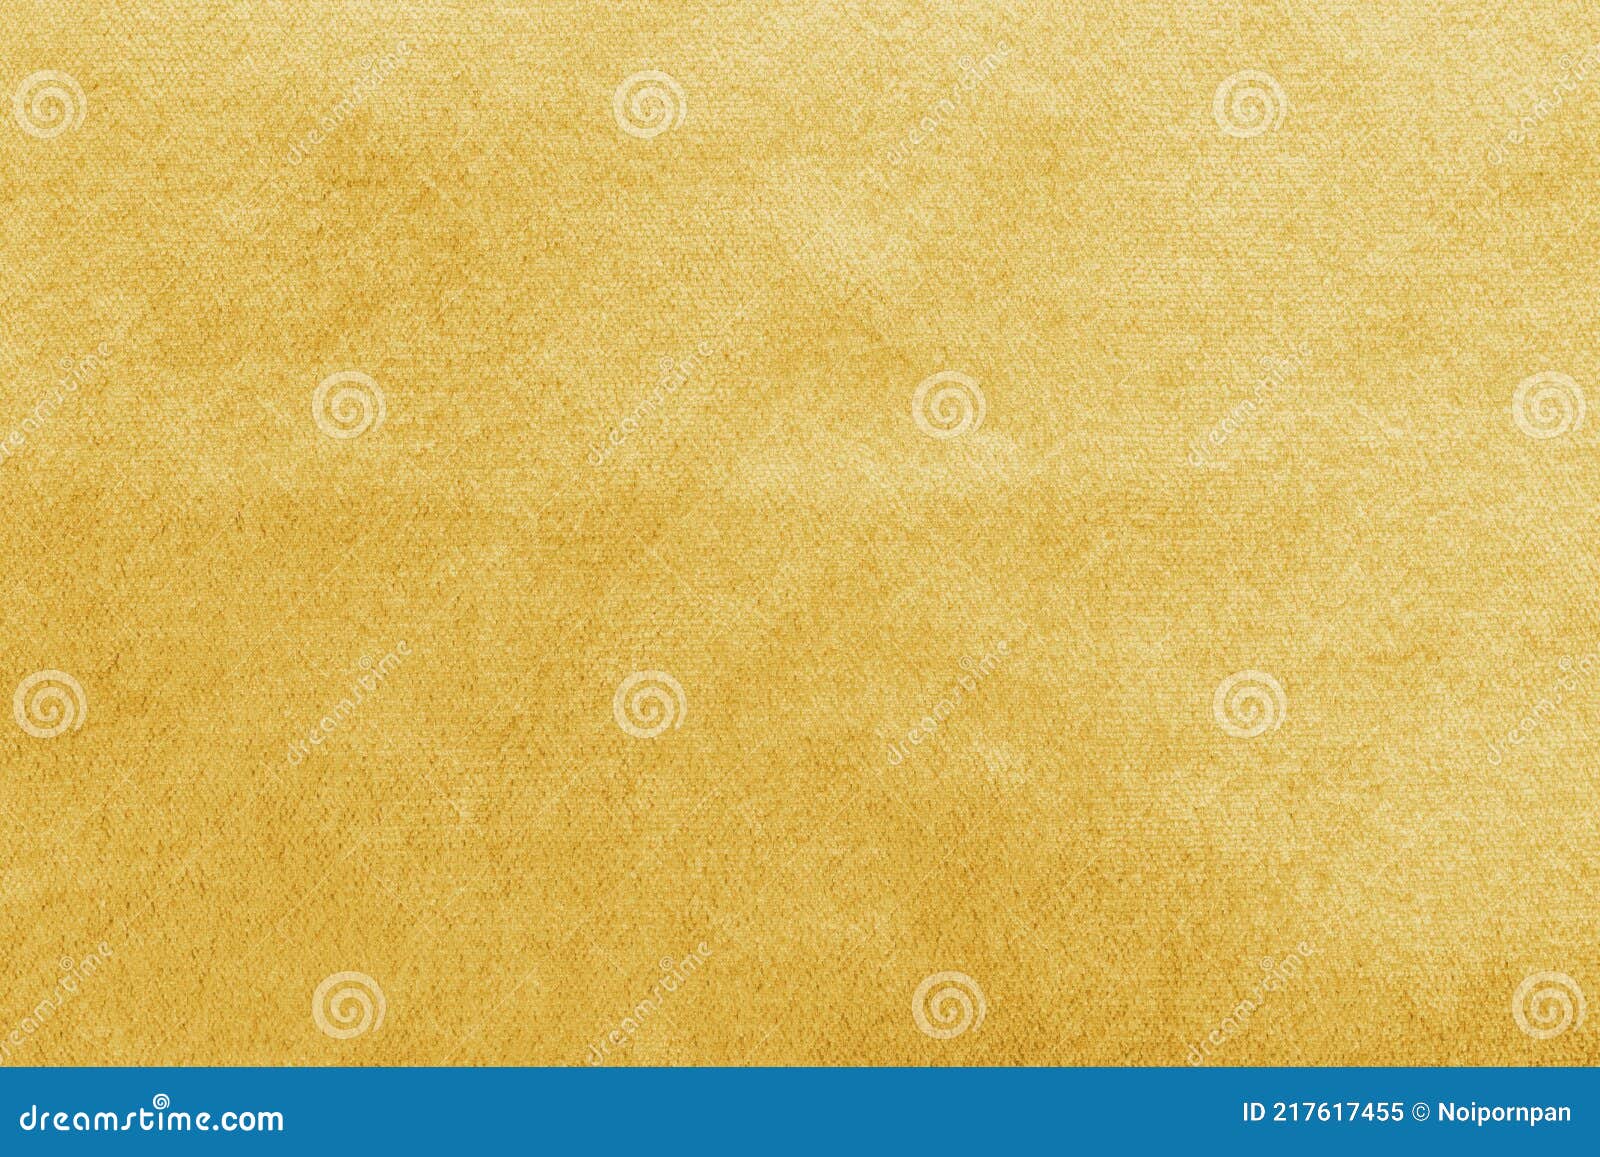 gold velvet background or golden yellow velour flannel texture made of cotton or wool with soft fluffy velvety satin